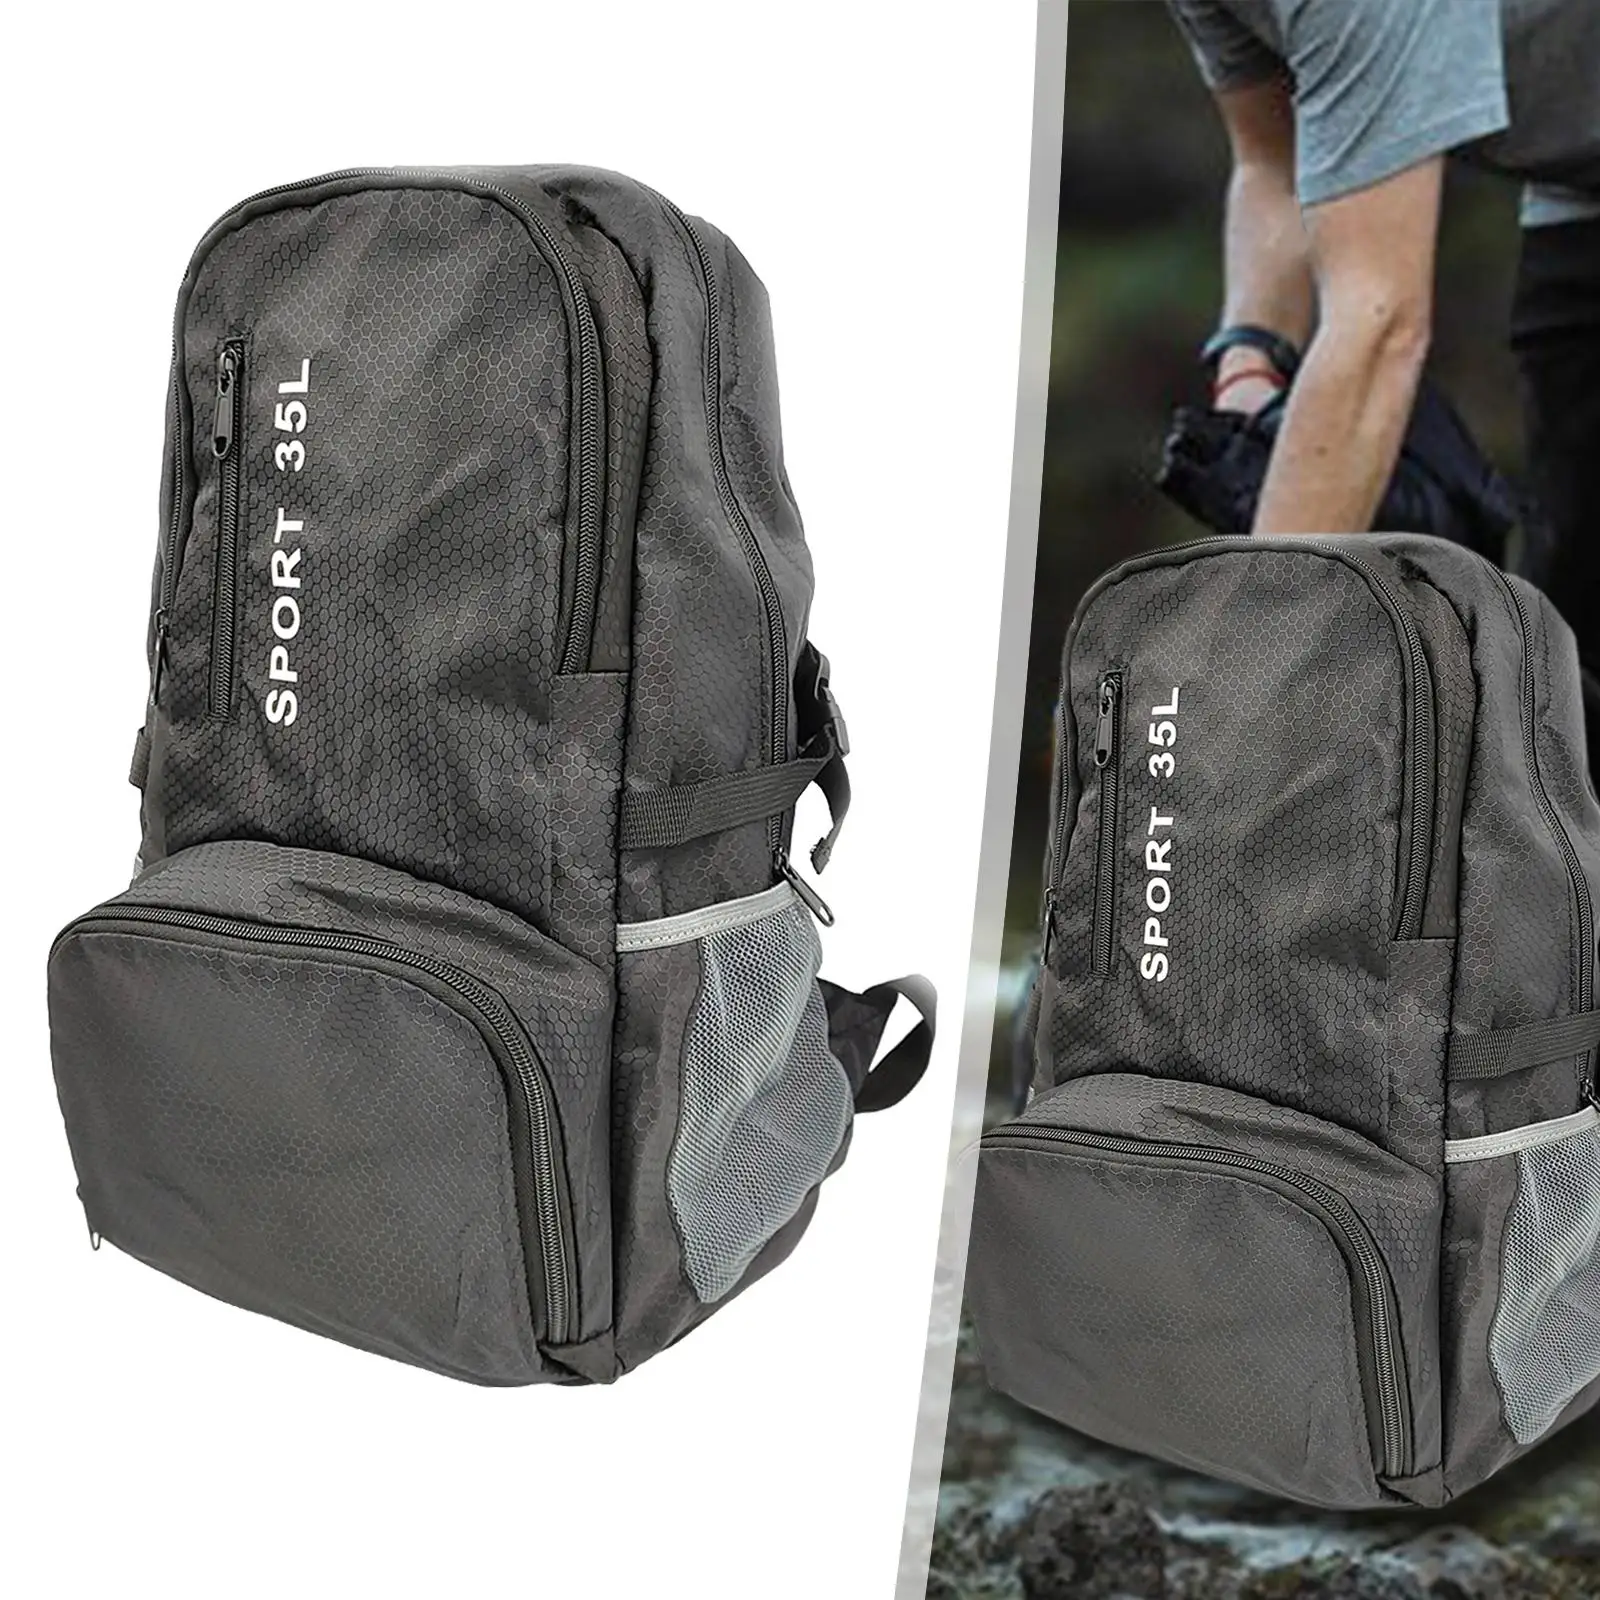 Camping Backpack Waterproof 35L Unisex Adults Large Capacity Foldable Backpack for Camping Trekking Survival Climbing Outdoor